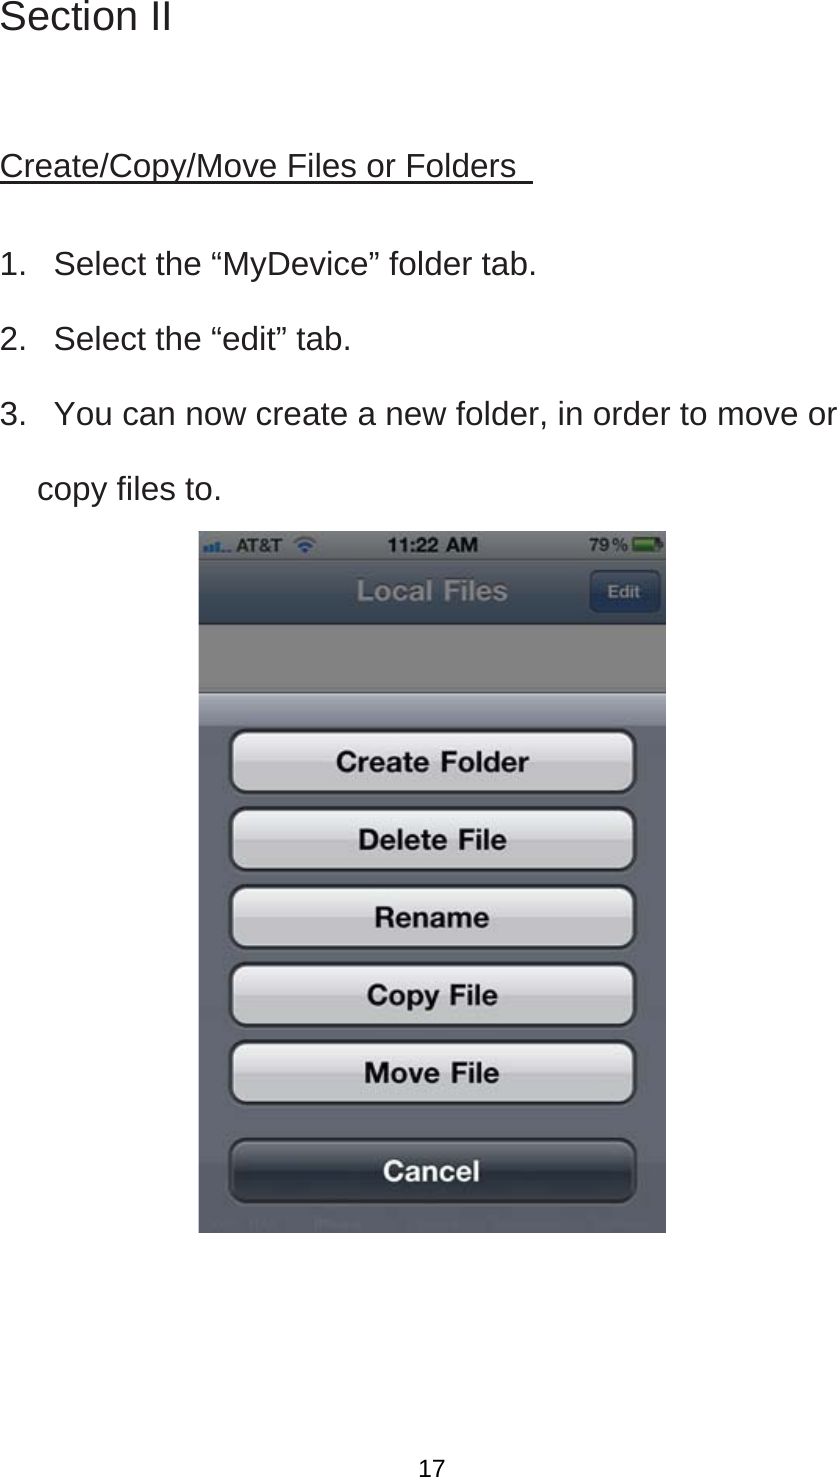 Section II  Create/Copy/Move Files or Folders   1.   Select the “MyDevice” folder tab.   2.   Select the “edit” tab.   3.   You can now create a new folder, in order to move or copy files to.       17